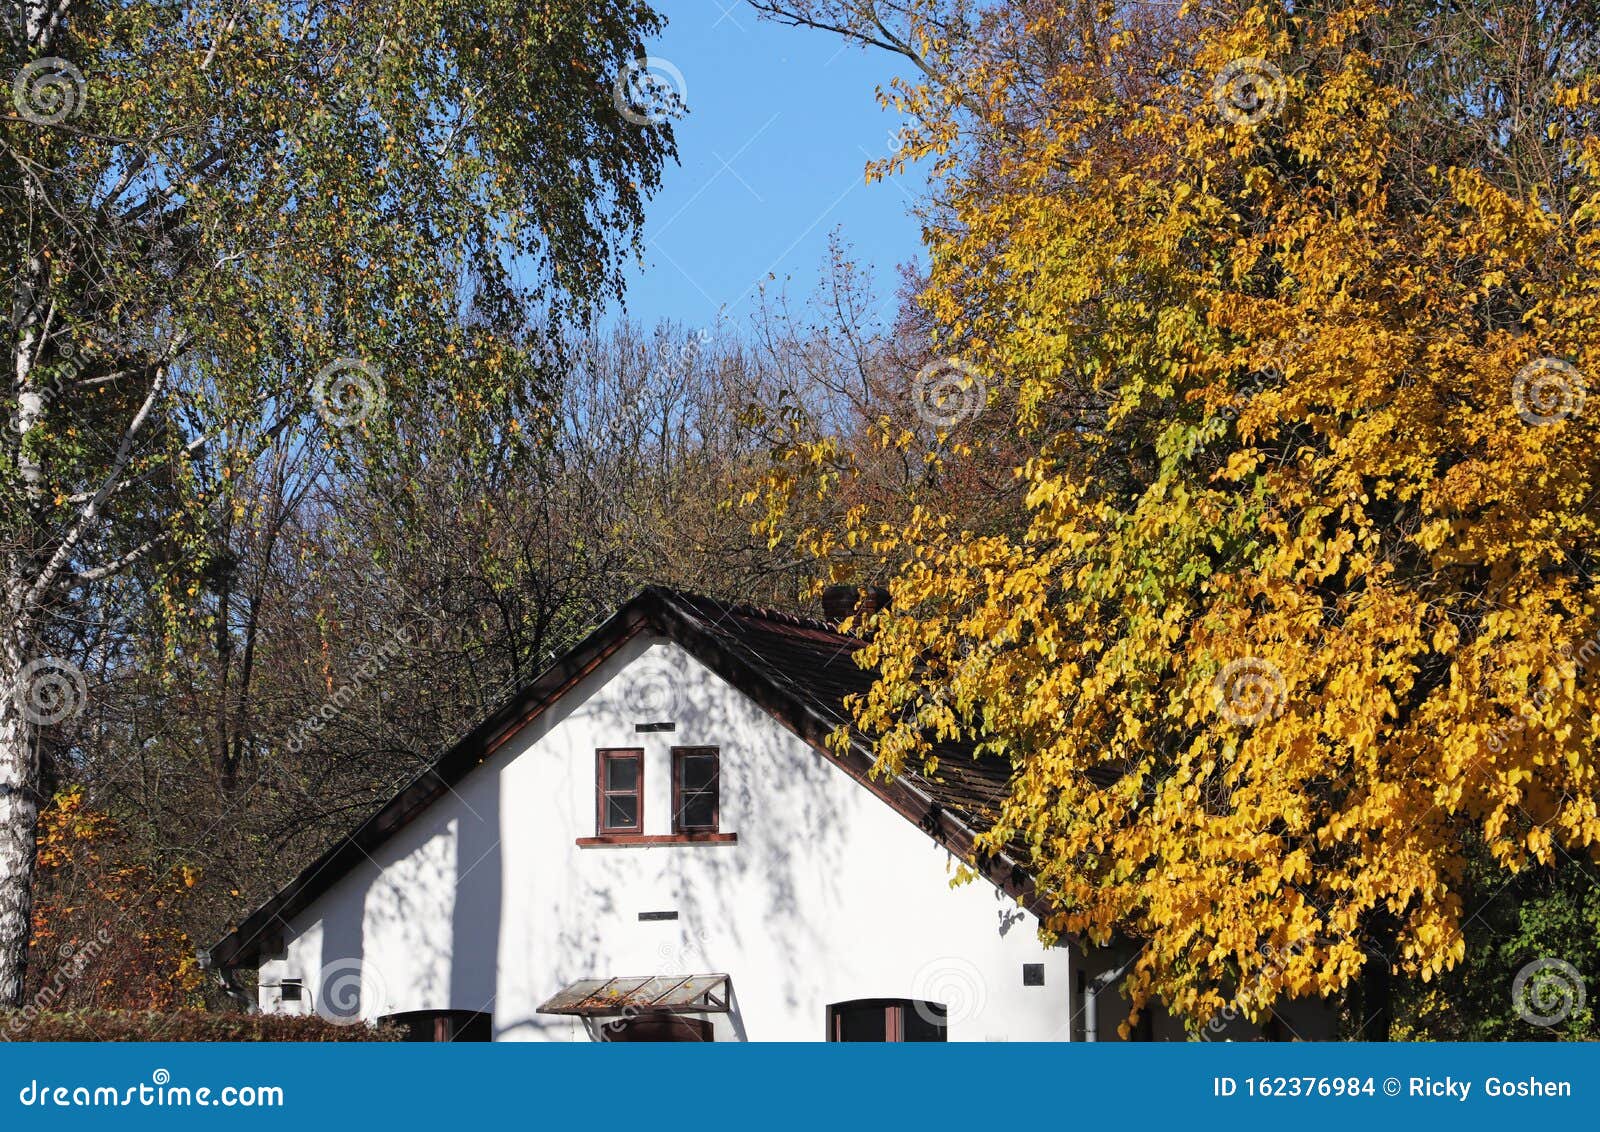 A house in Auschwitz editorial stock image. Image of fall - 162376984